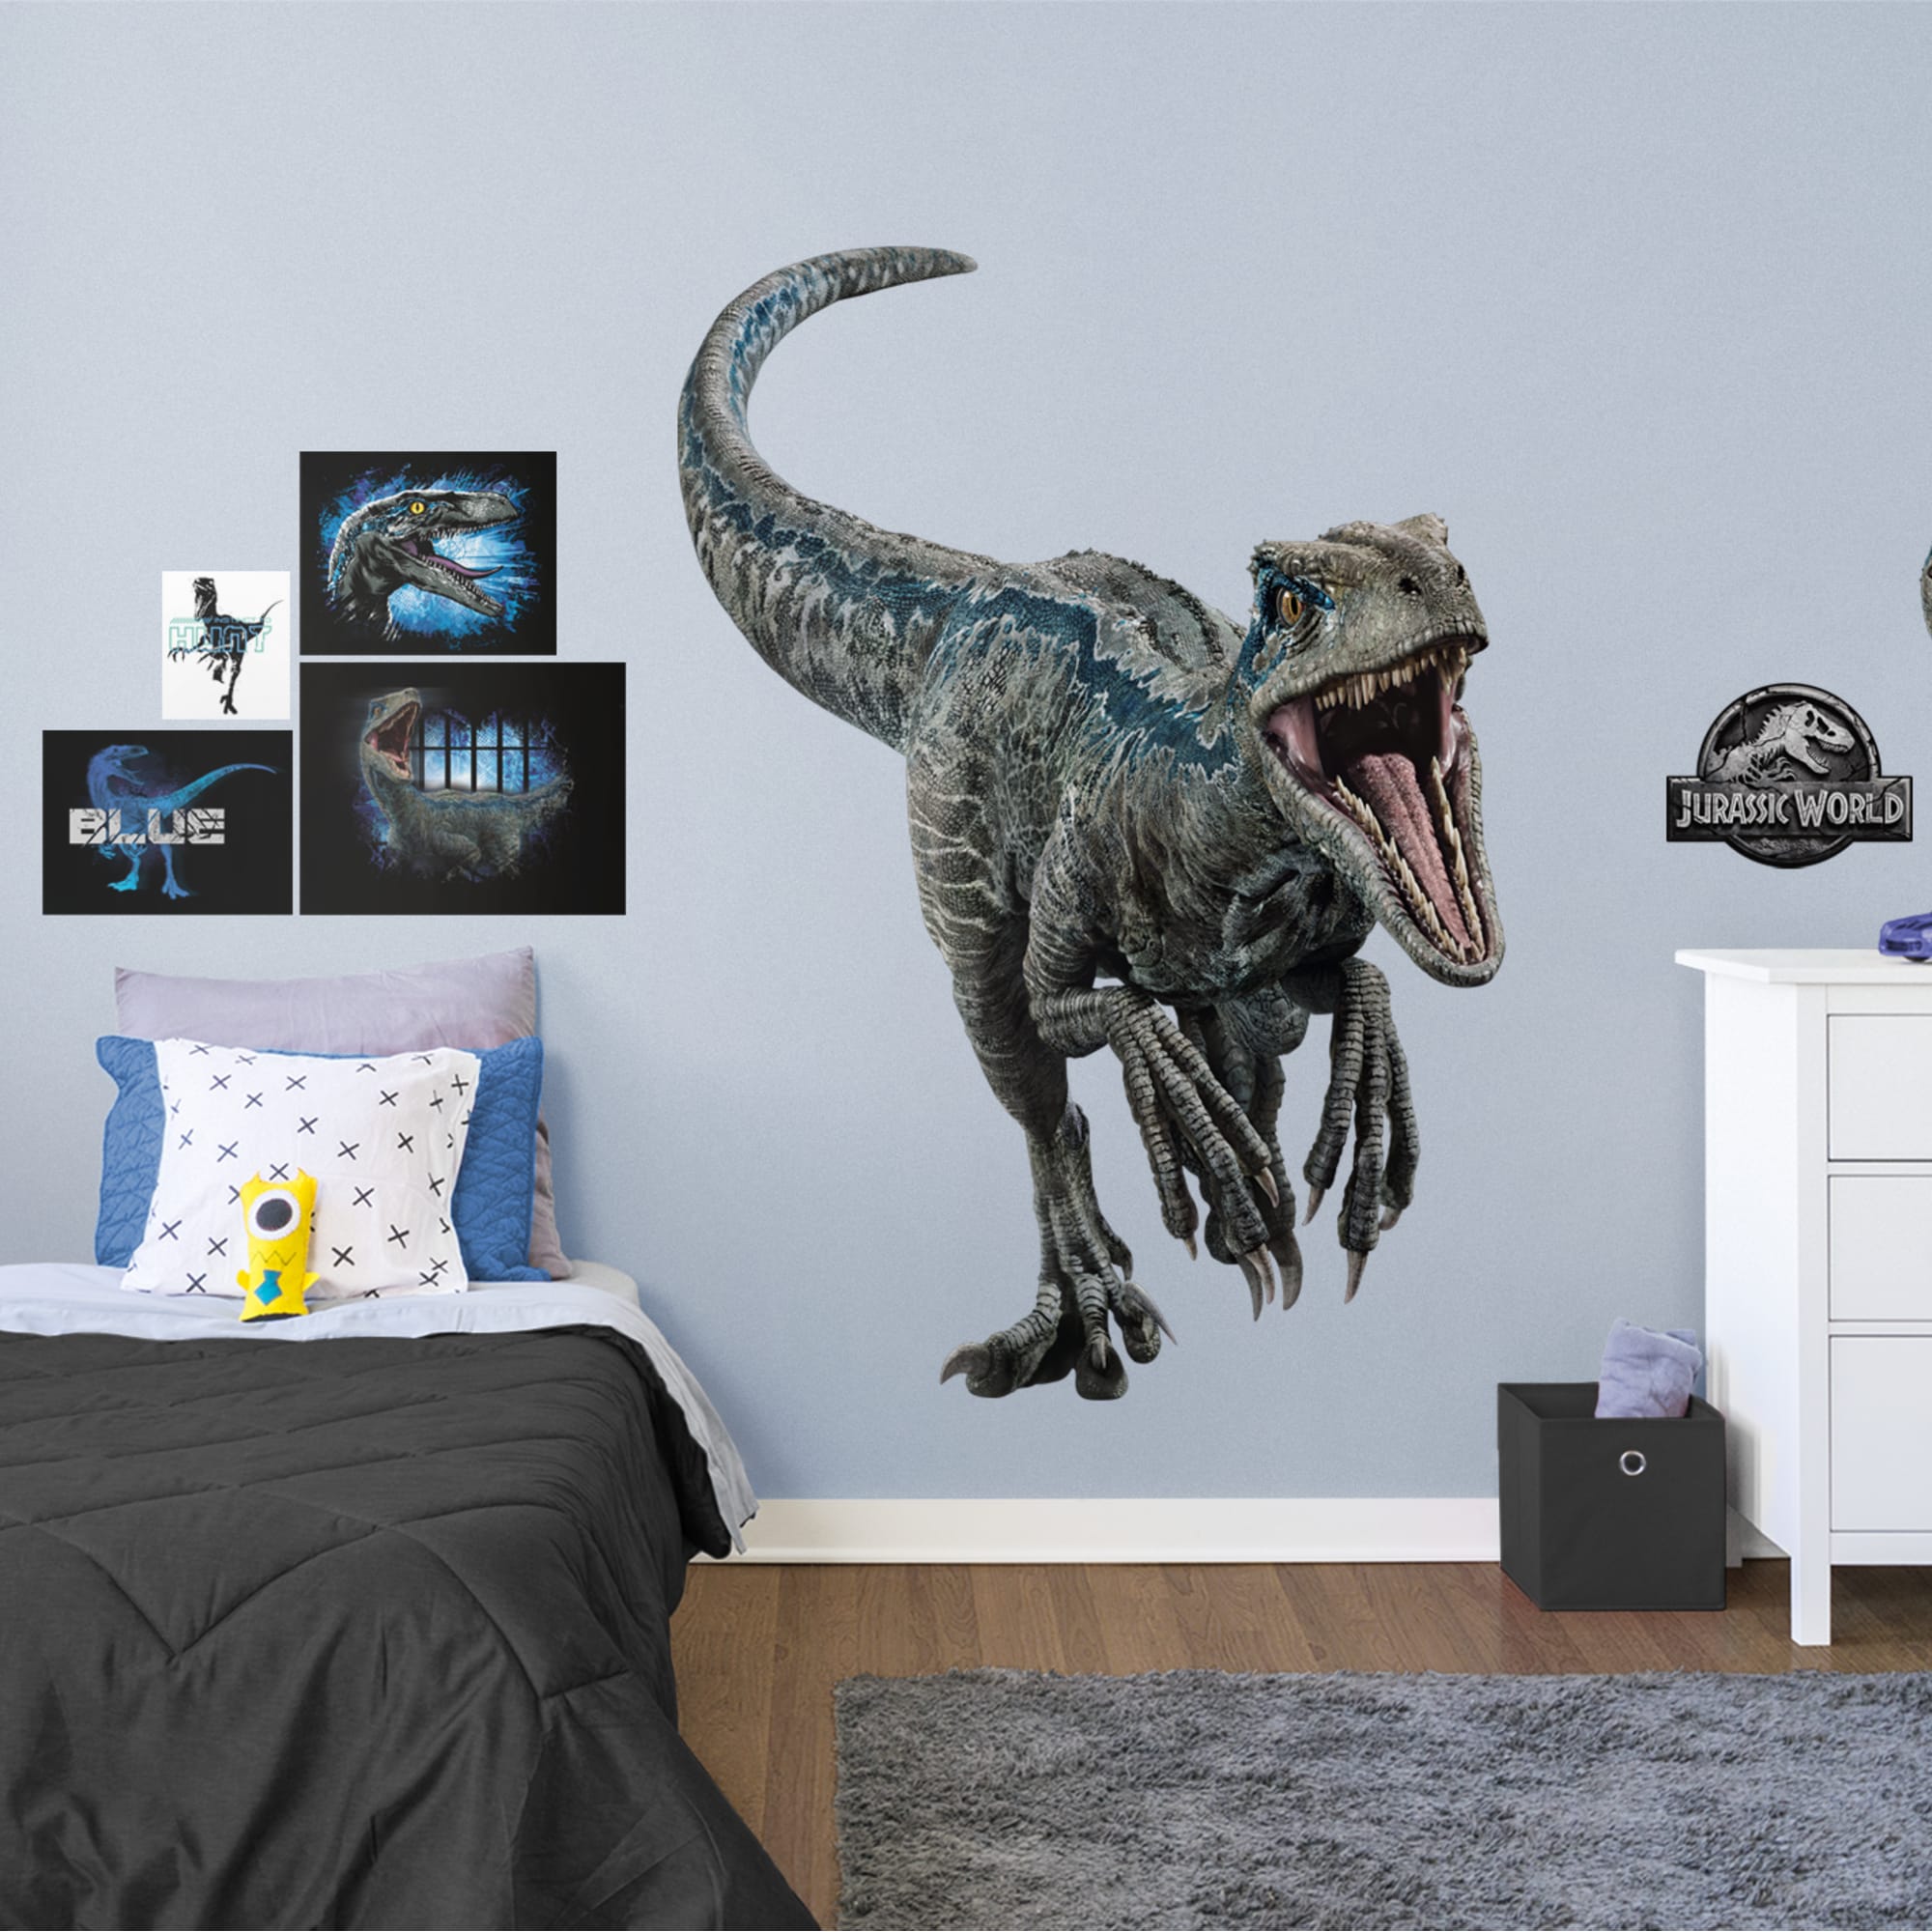 Velociraptor "Blue" - Jurassic World: Fallen Kingdom - Officially Licensed Removable Wall Decal Huge Character + 6 Decals (50"W